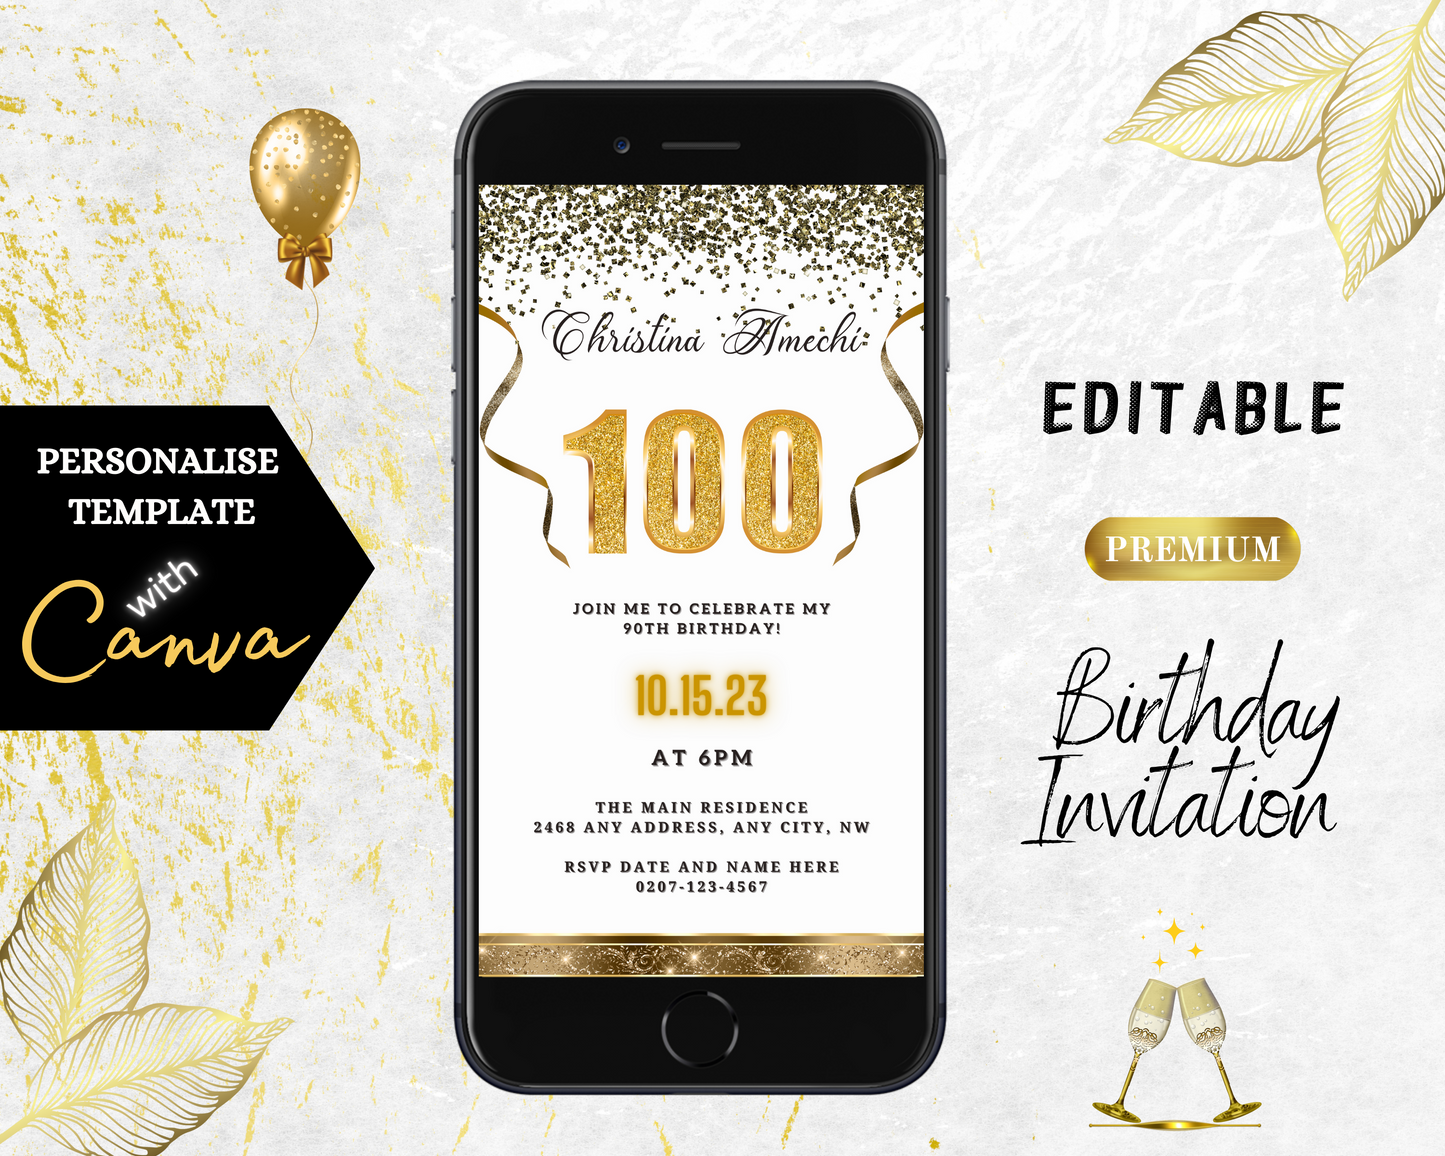 Customizable digital invitation for a 100th Birthday with white gold confetti design, shown on a smartphone screen with editable text and elements via Canva.